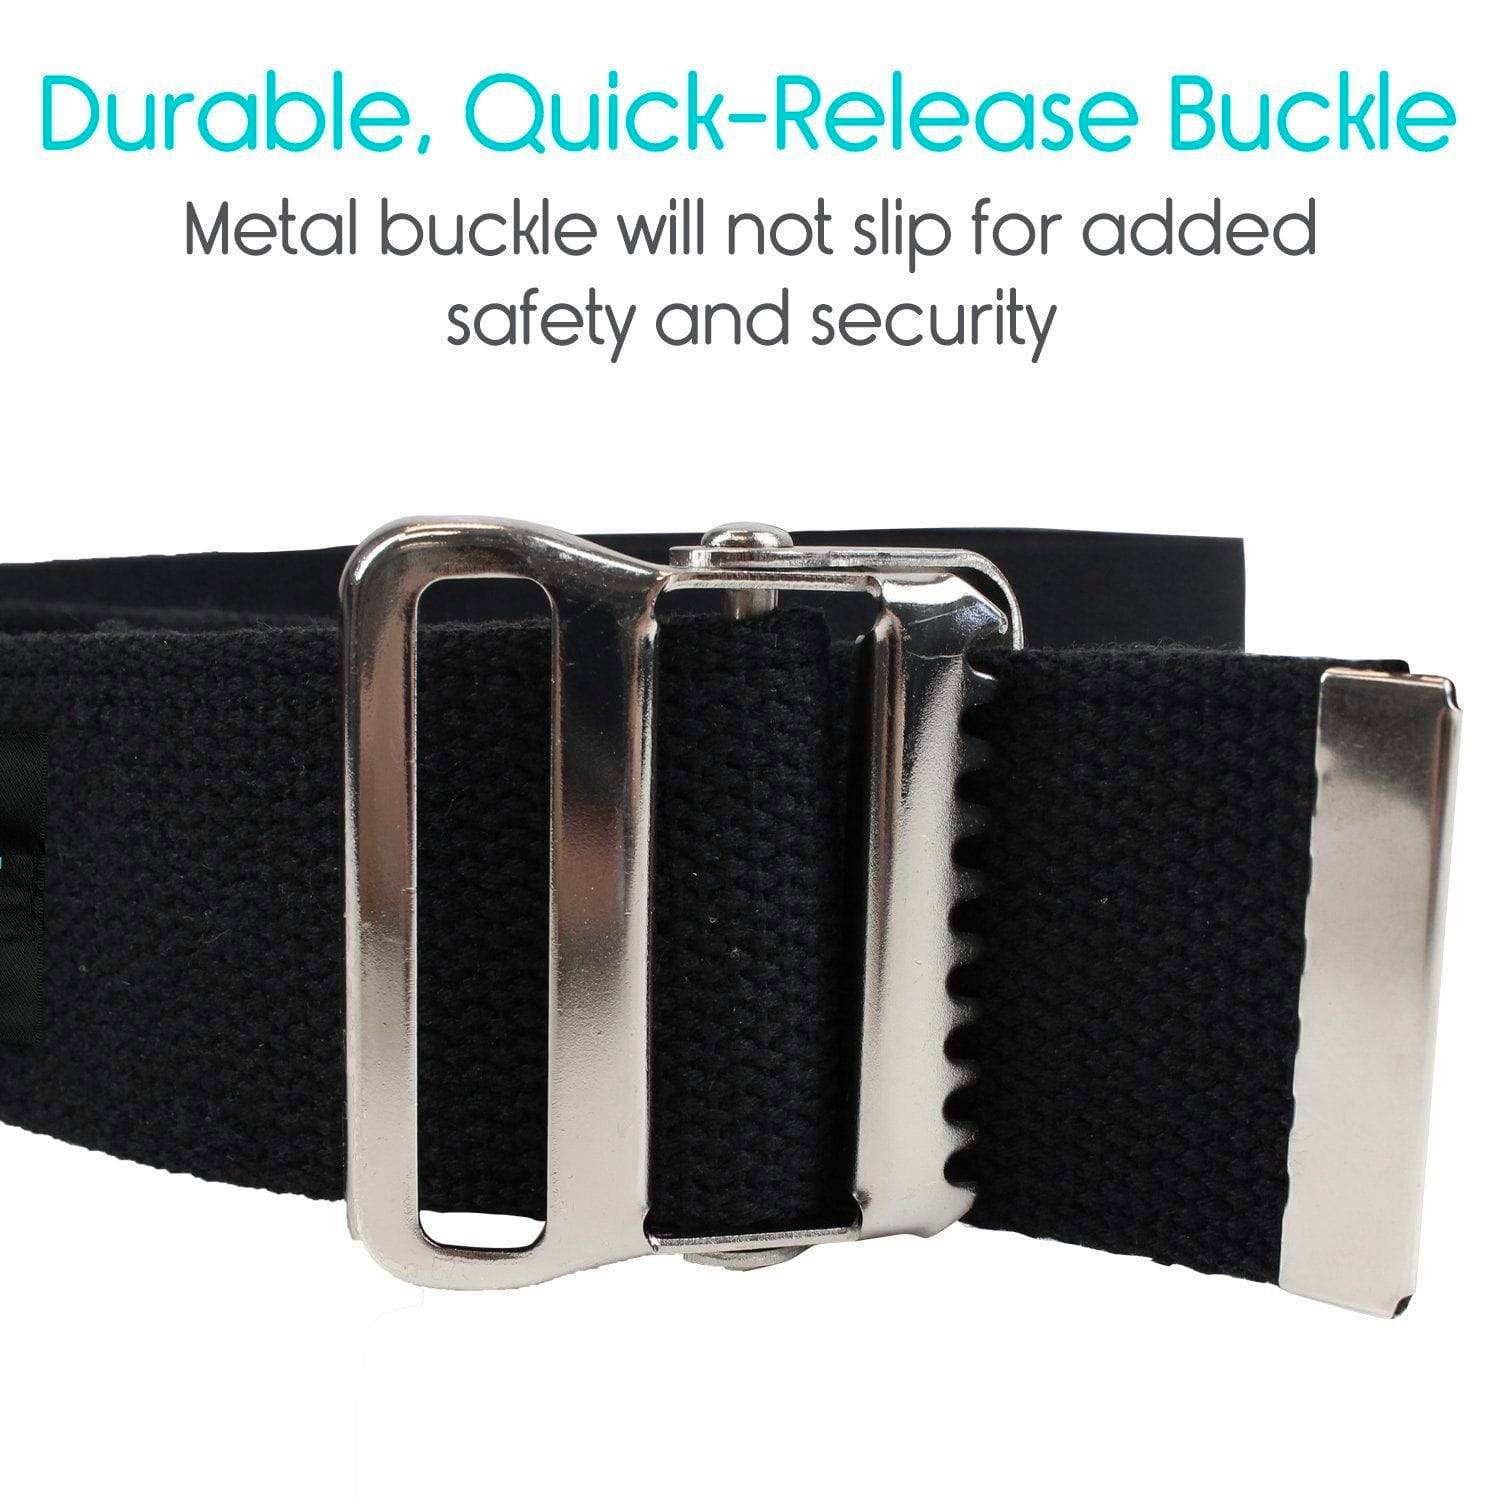 60" gait belt with durable, quick-release buckle highlighted